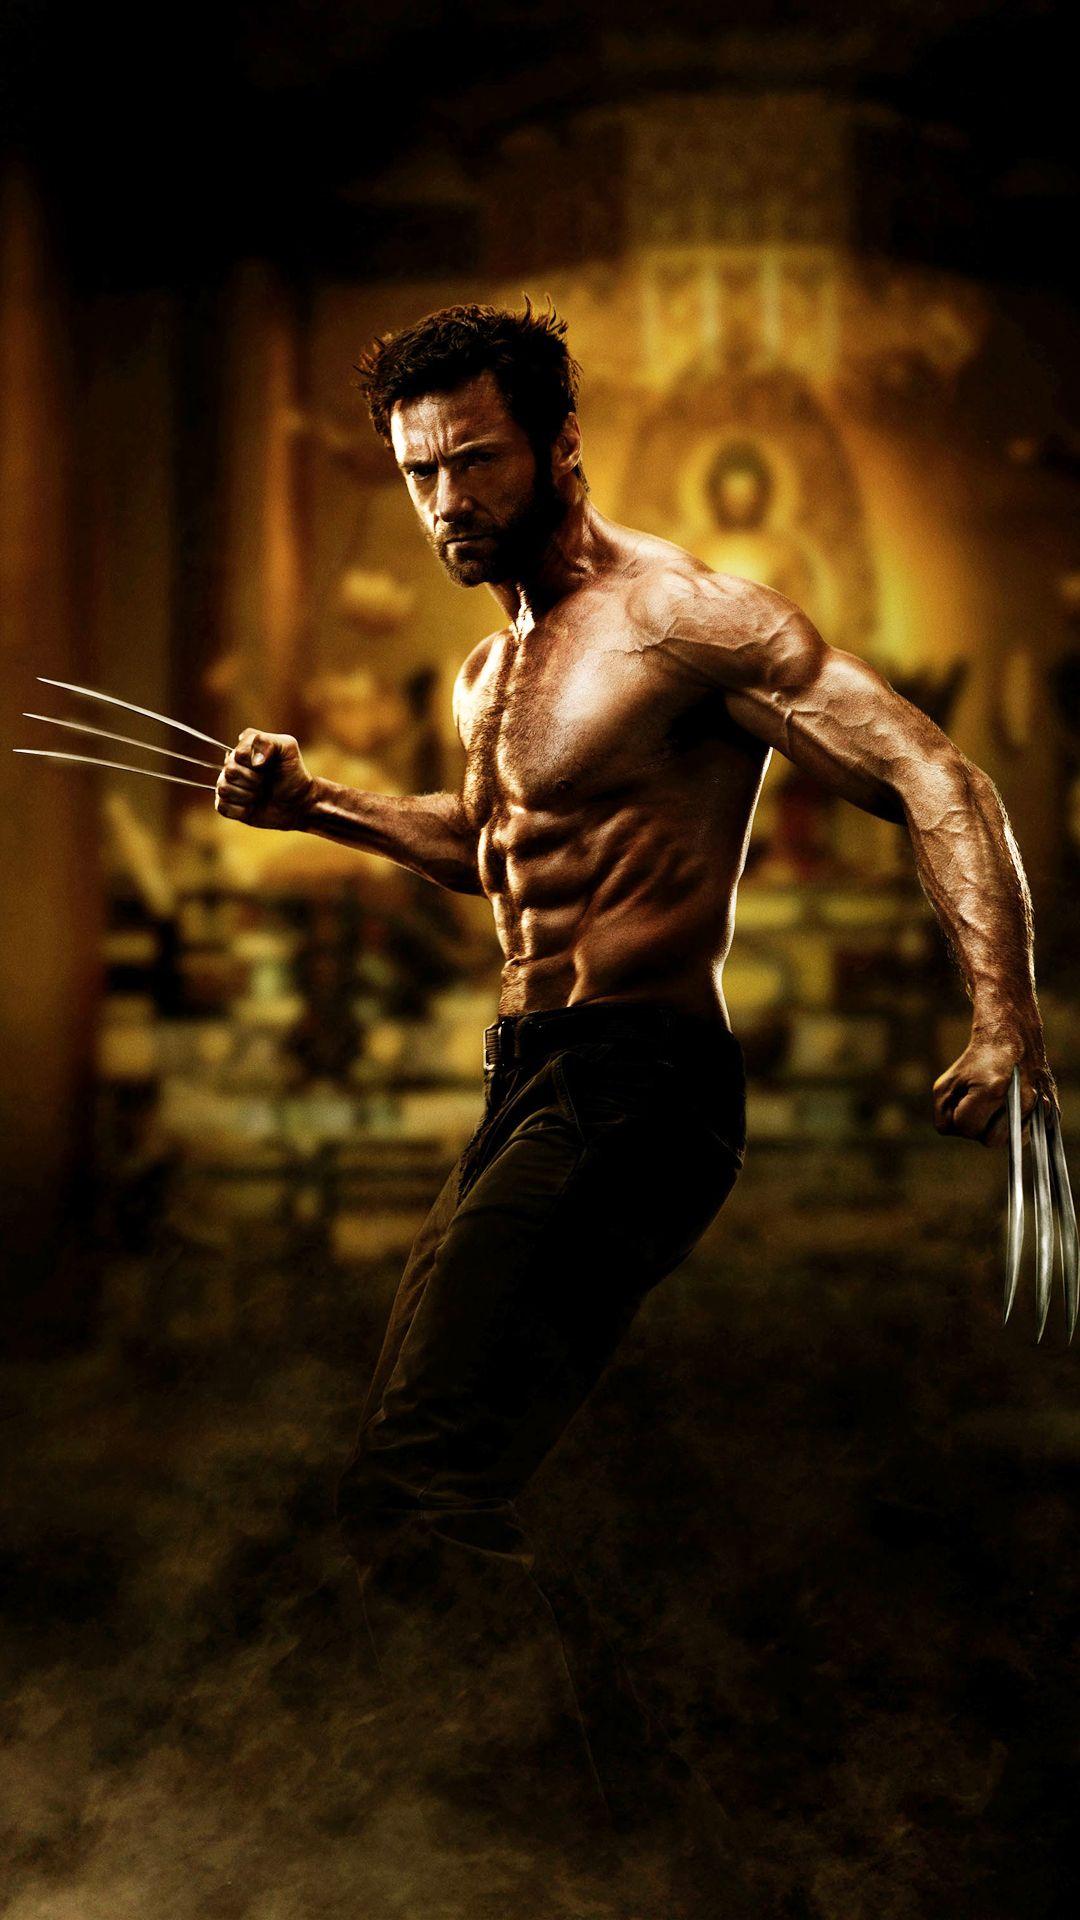 Wolverine htc one wallpaper, free and easy to download